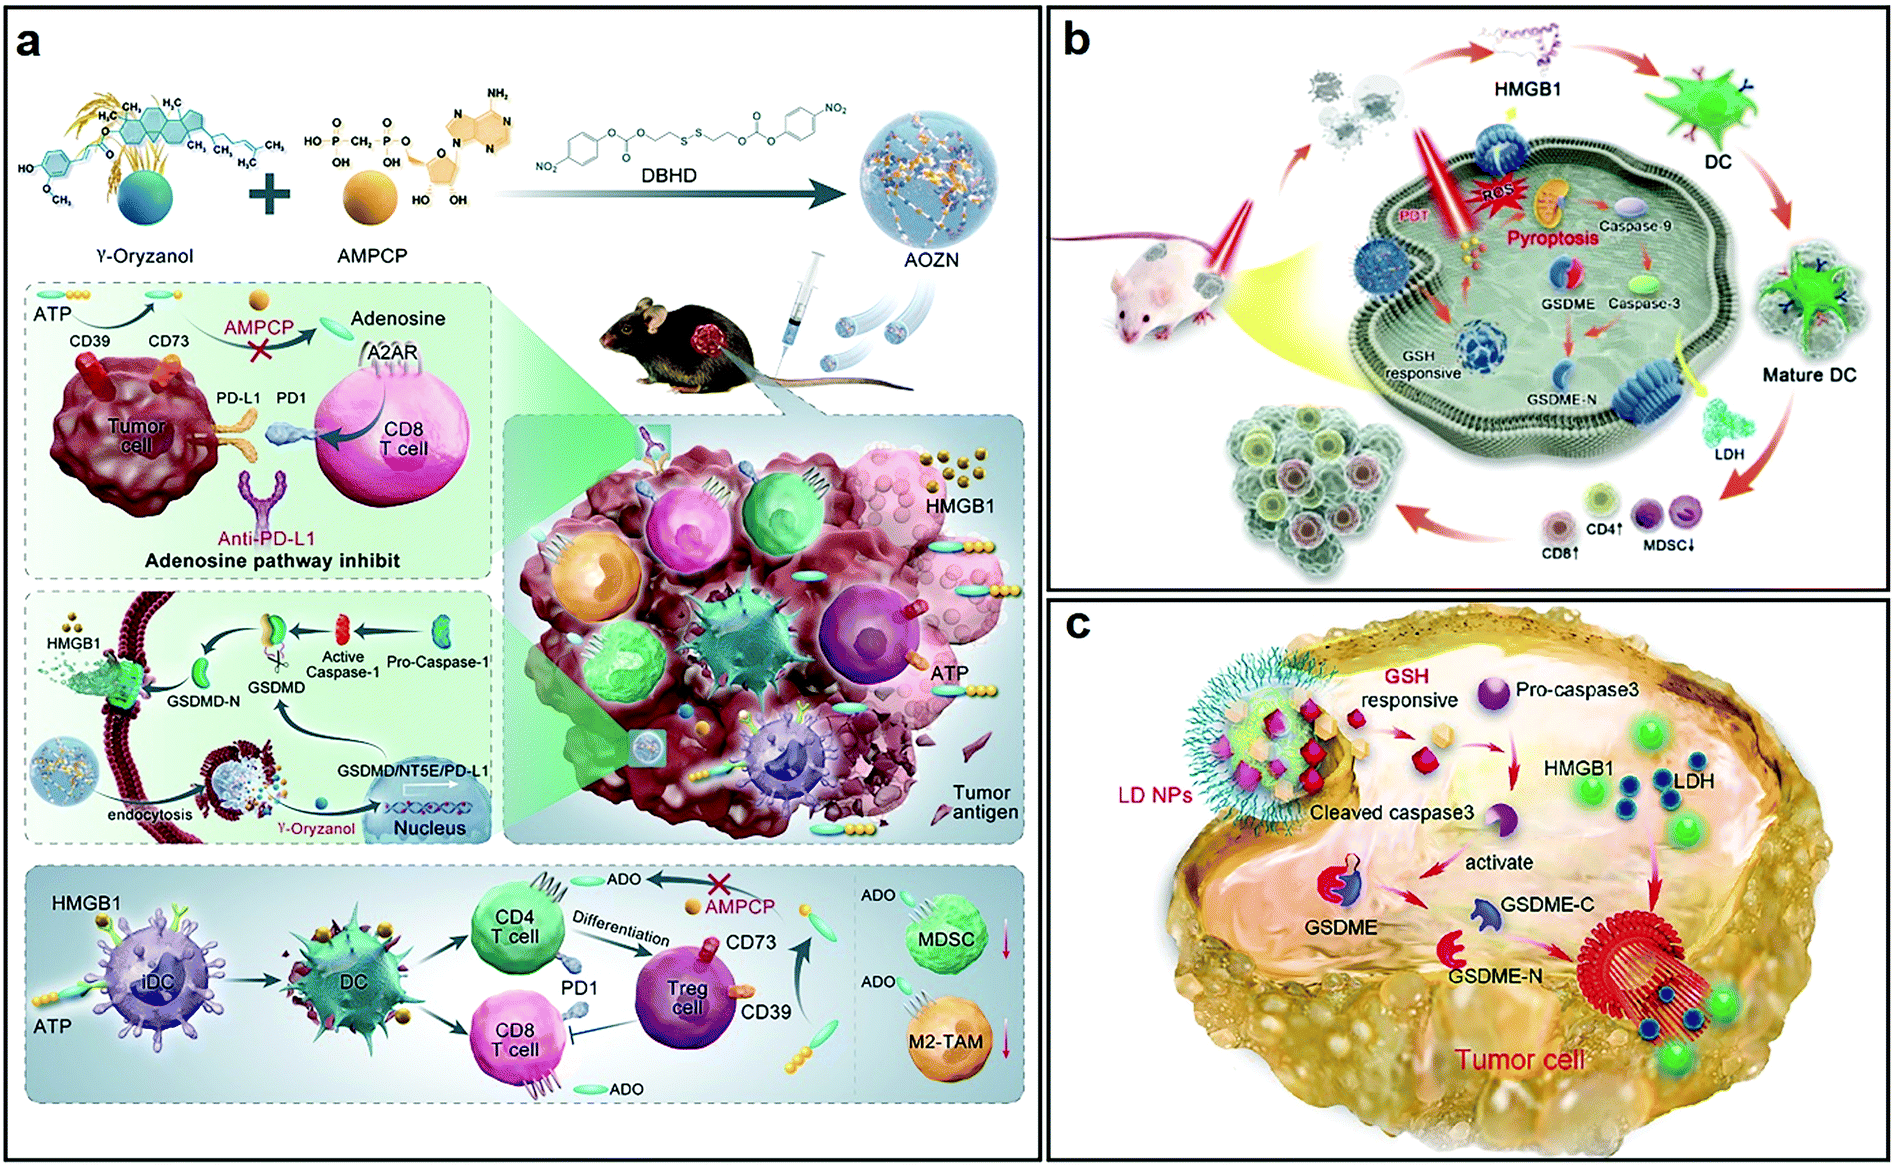 Bioengineered nanogels for cancer immunotherapy - Chemical Society Reviews  (RSC Publishing) DOI:10.1039/D2CS00247G